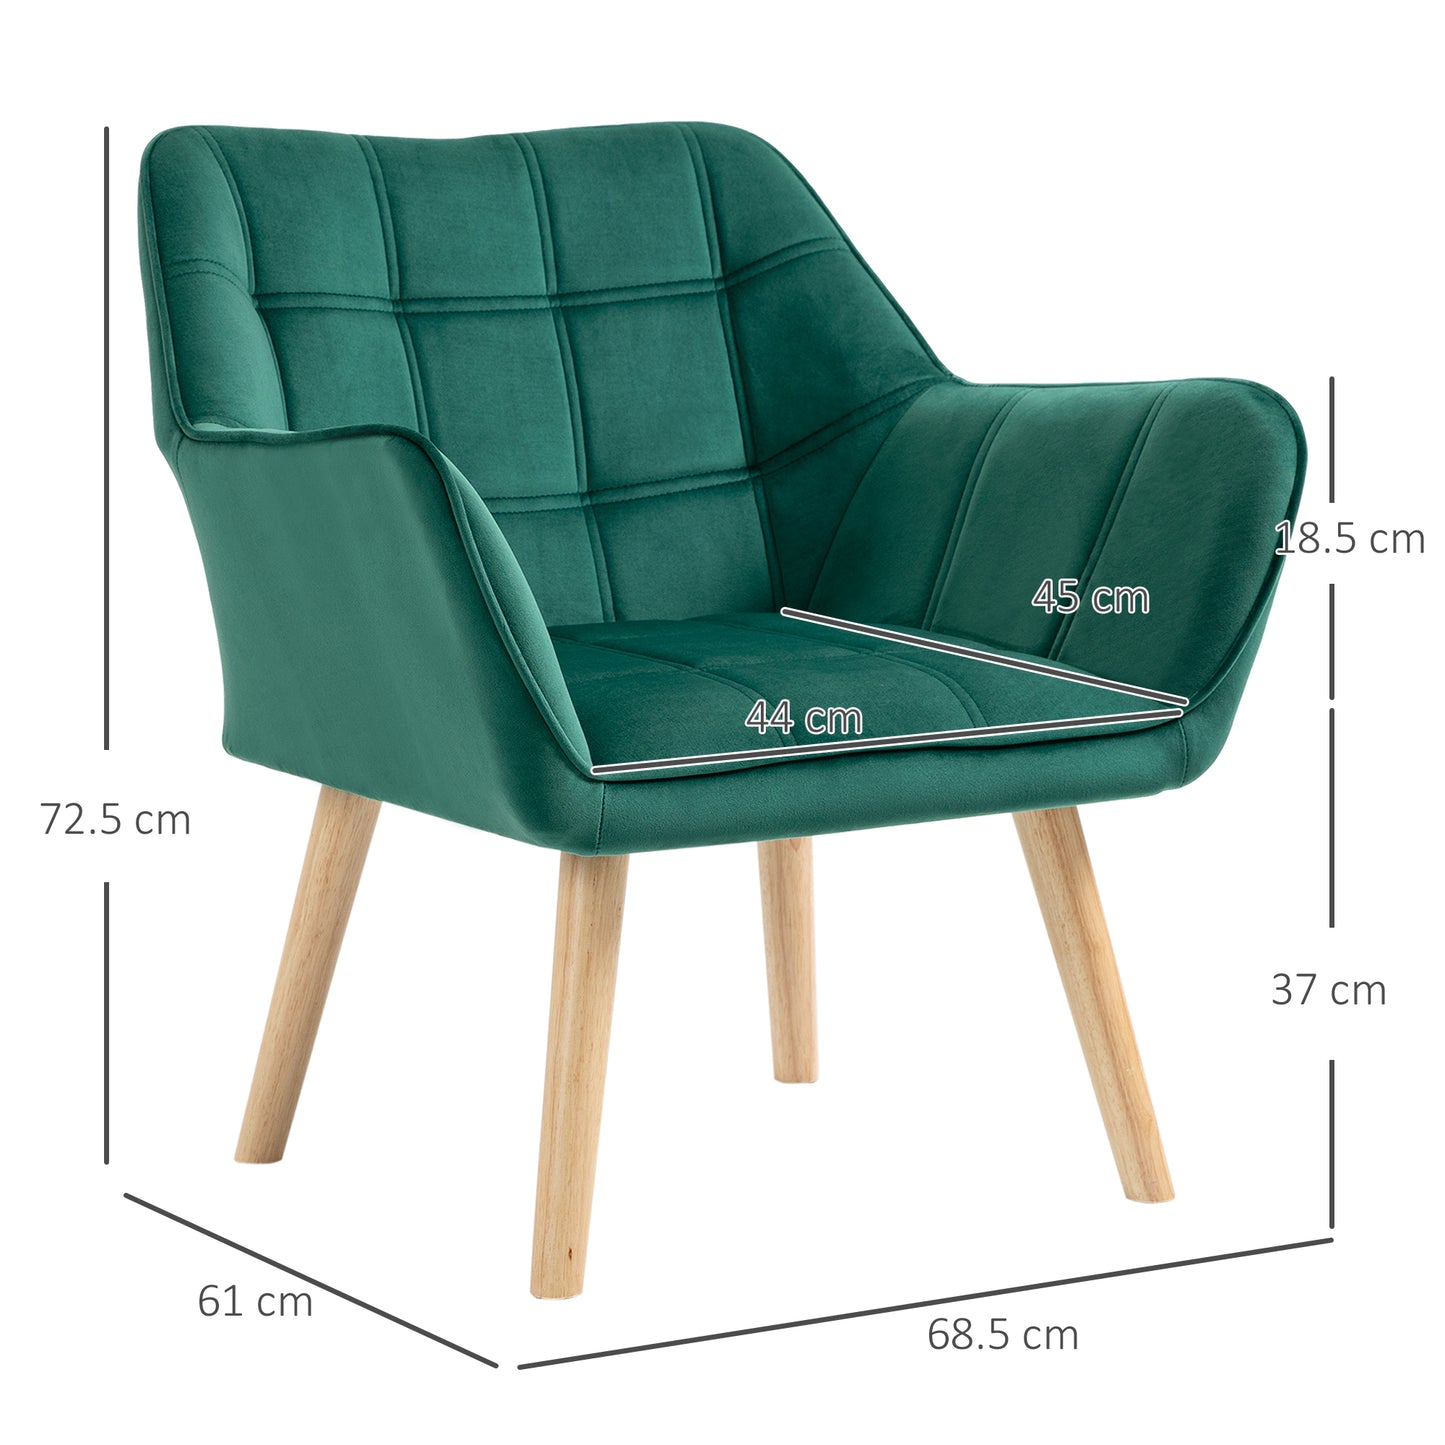 HOMCOM Accent Chair, Arm Chair with Wide Arms, Slanted Back, Thick Padding and Rubber Wooden Legs for Living Room, Green